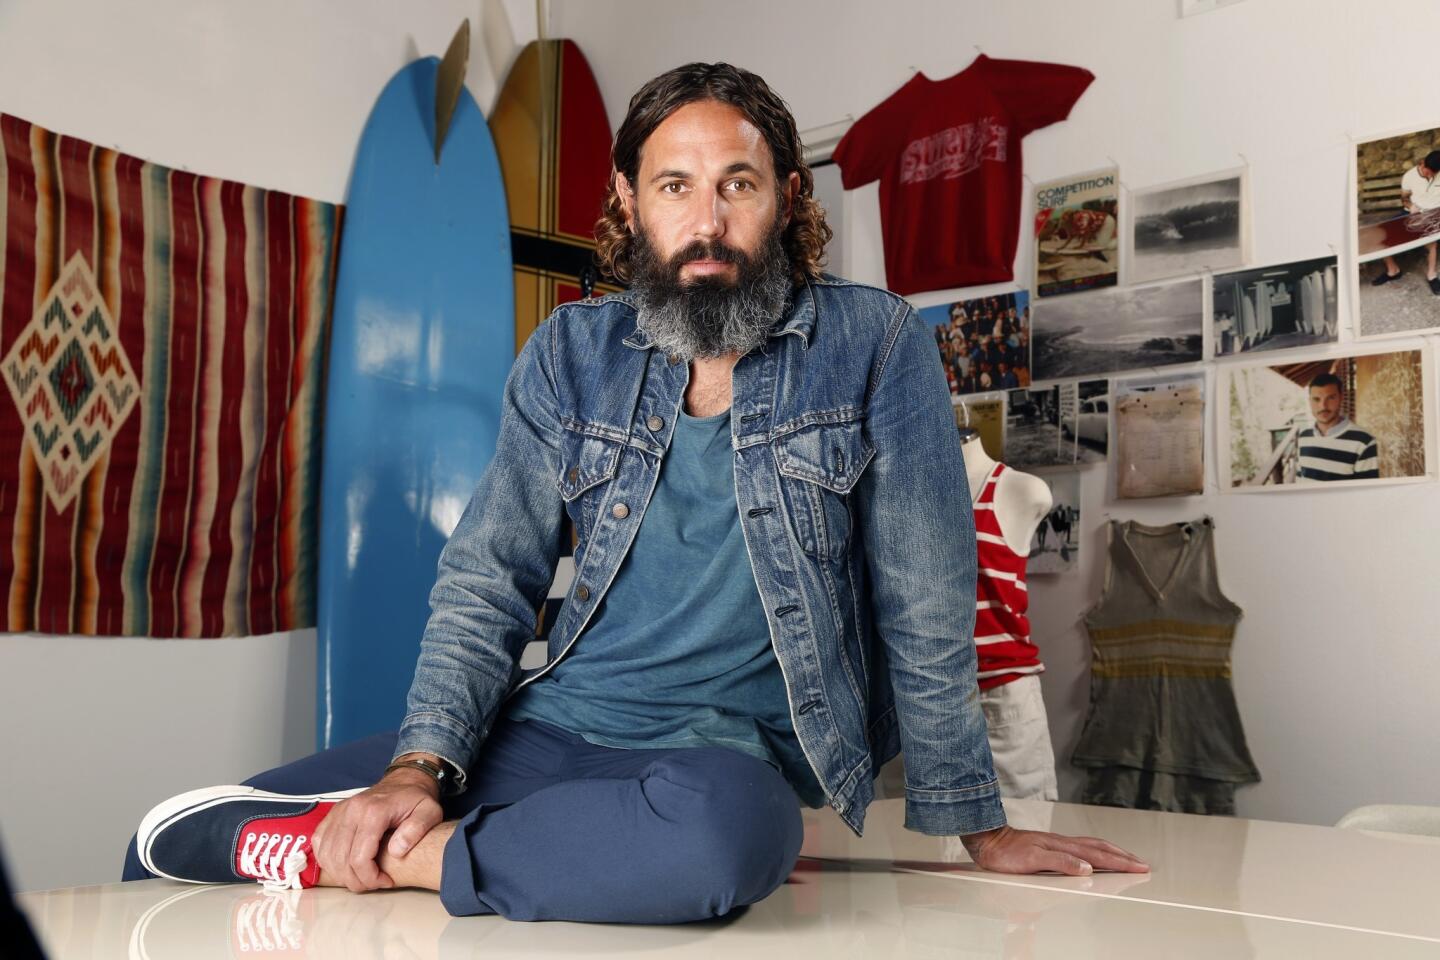 Designer John Moore poses in the studio of his L.A.-based luxe retro-surf label M.Nii. Moore was recently named by GQ as one of the best new menswear designers in America for 2014.